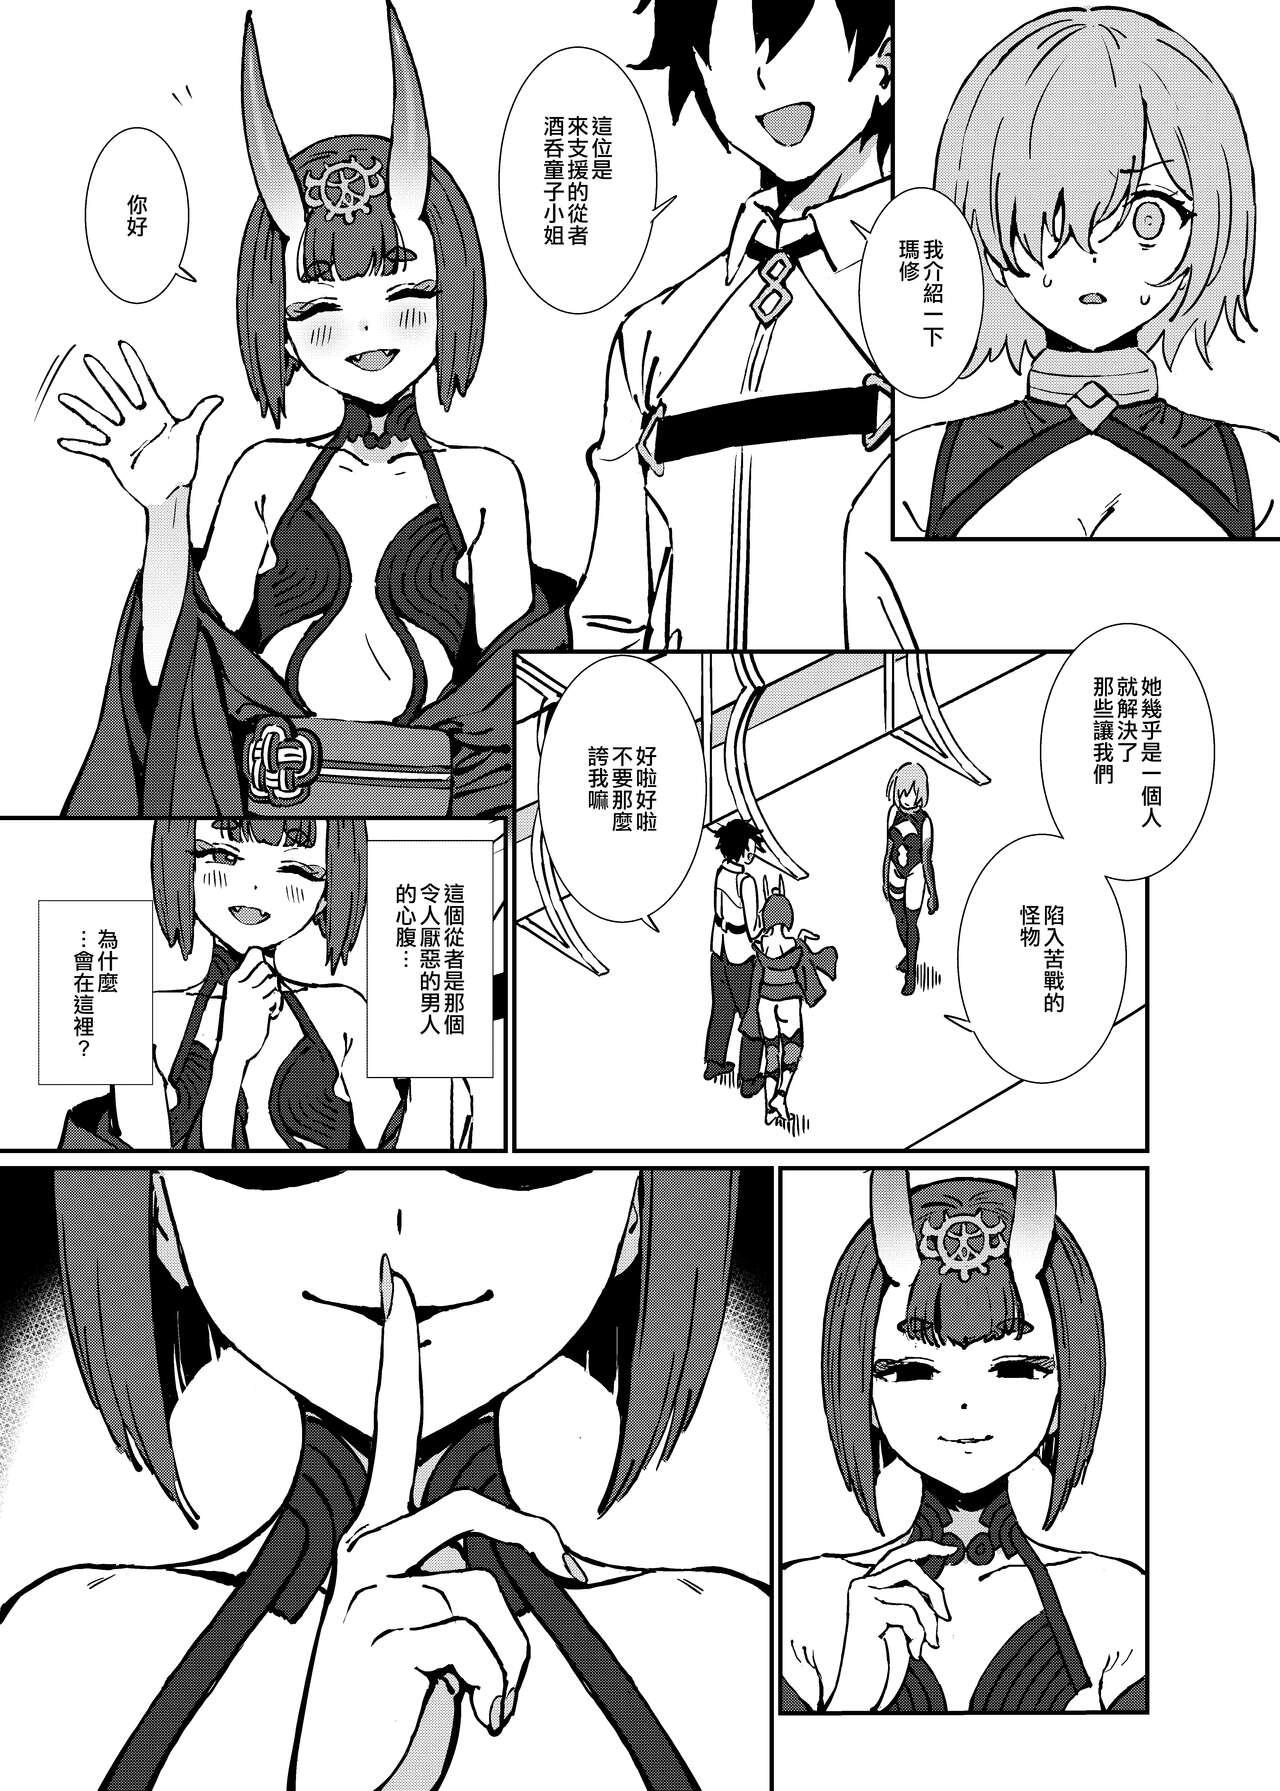 Moaning Anten - Fate grand order Rubdown - Page 11